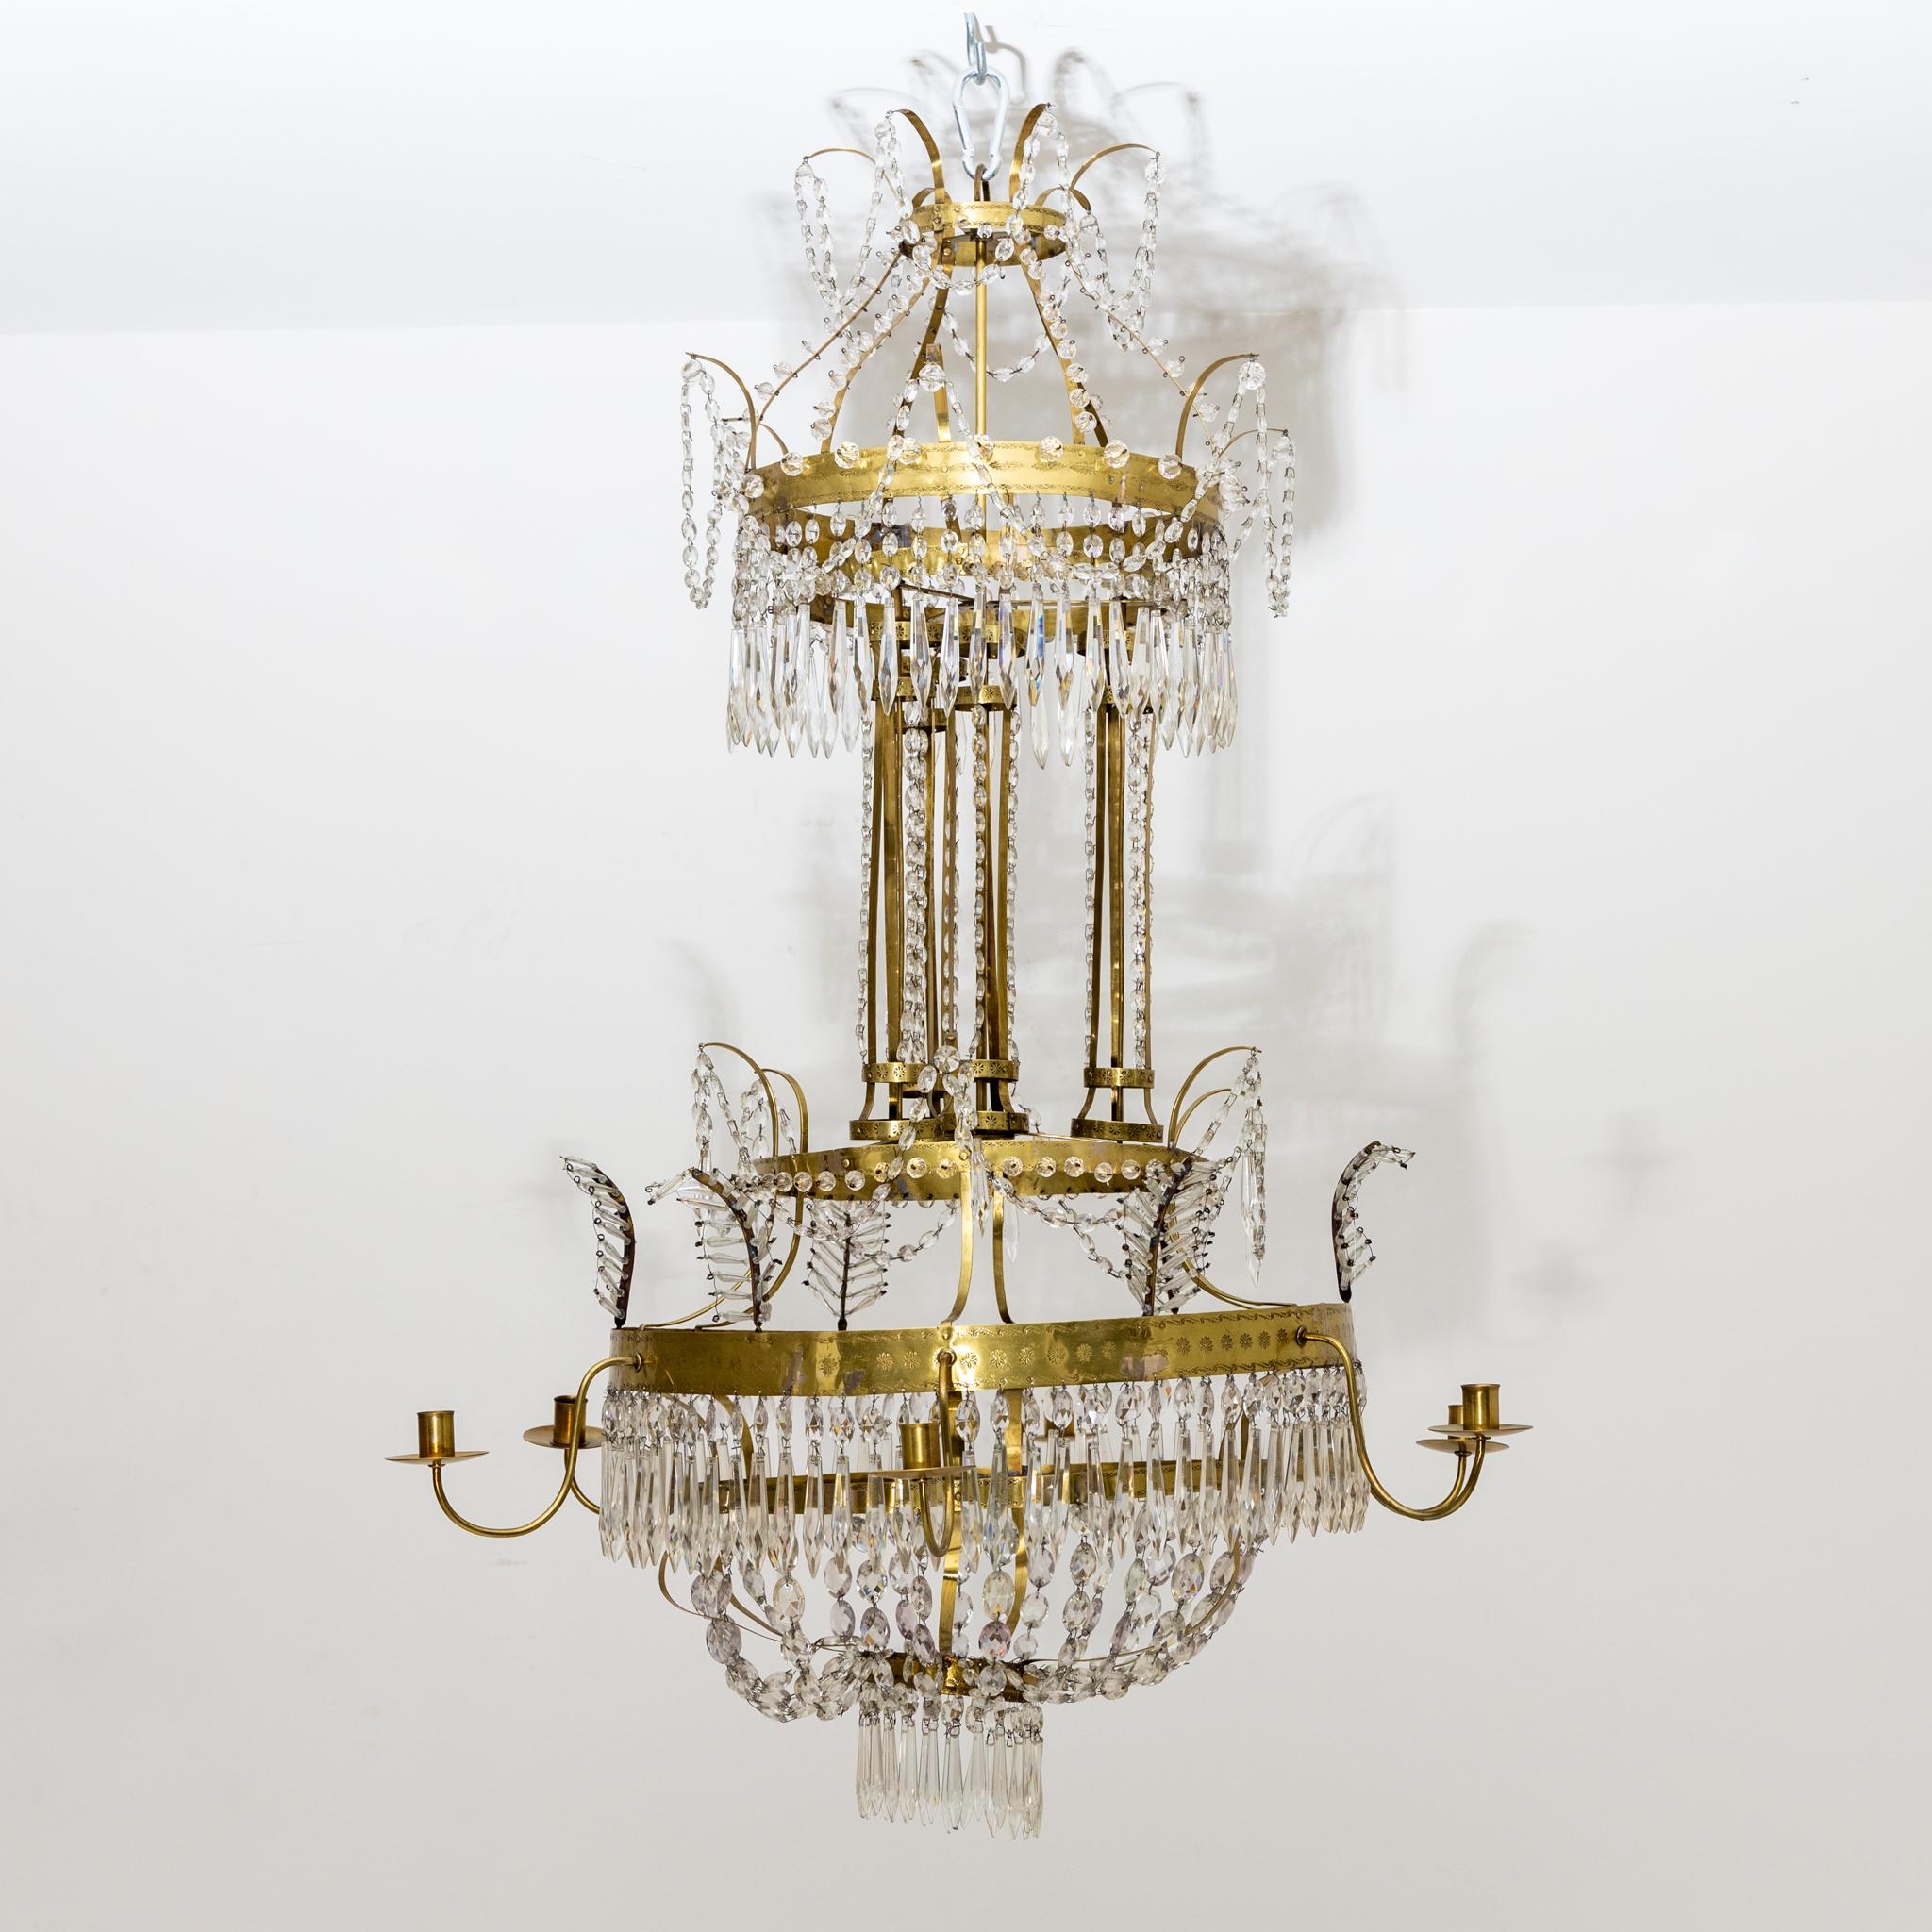 Large brass ceiling chandelier with rich crystal hangings and six arms with candle grommets.